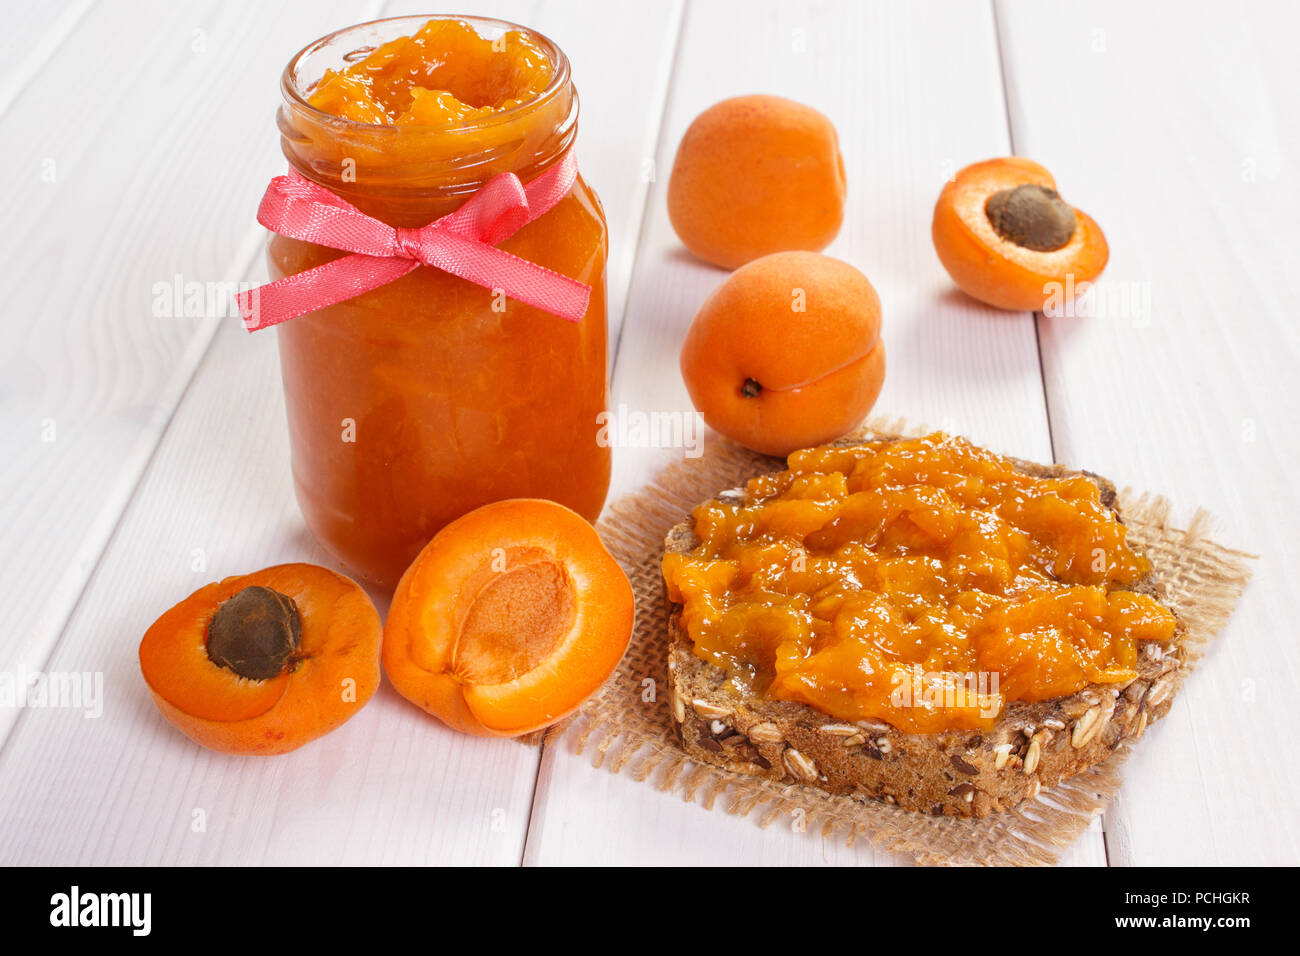 Fresh prepared sandwich with apricot jam or marmalade and ripe fruits, concept of healthy sweet dessert Stock Photo